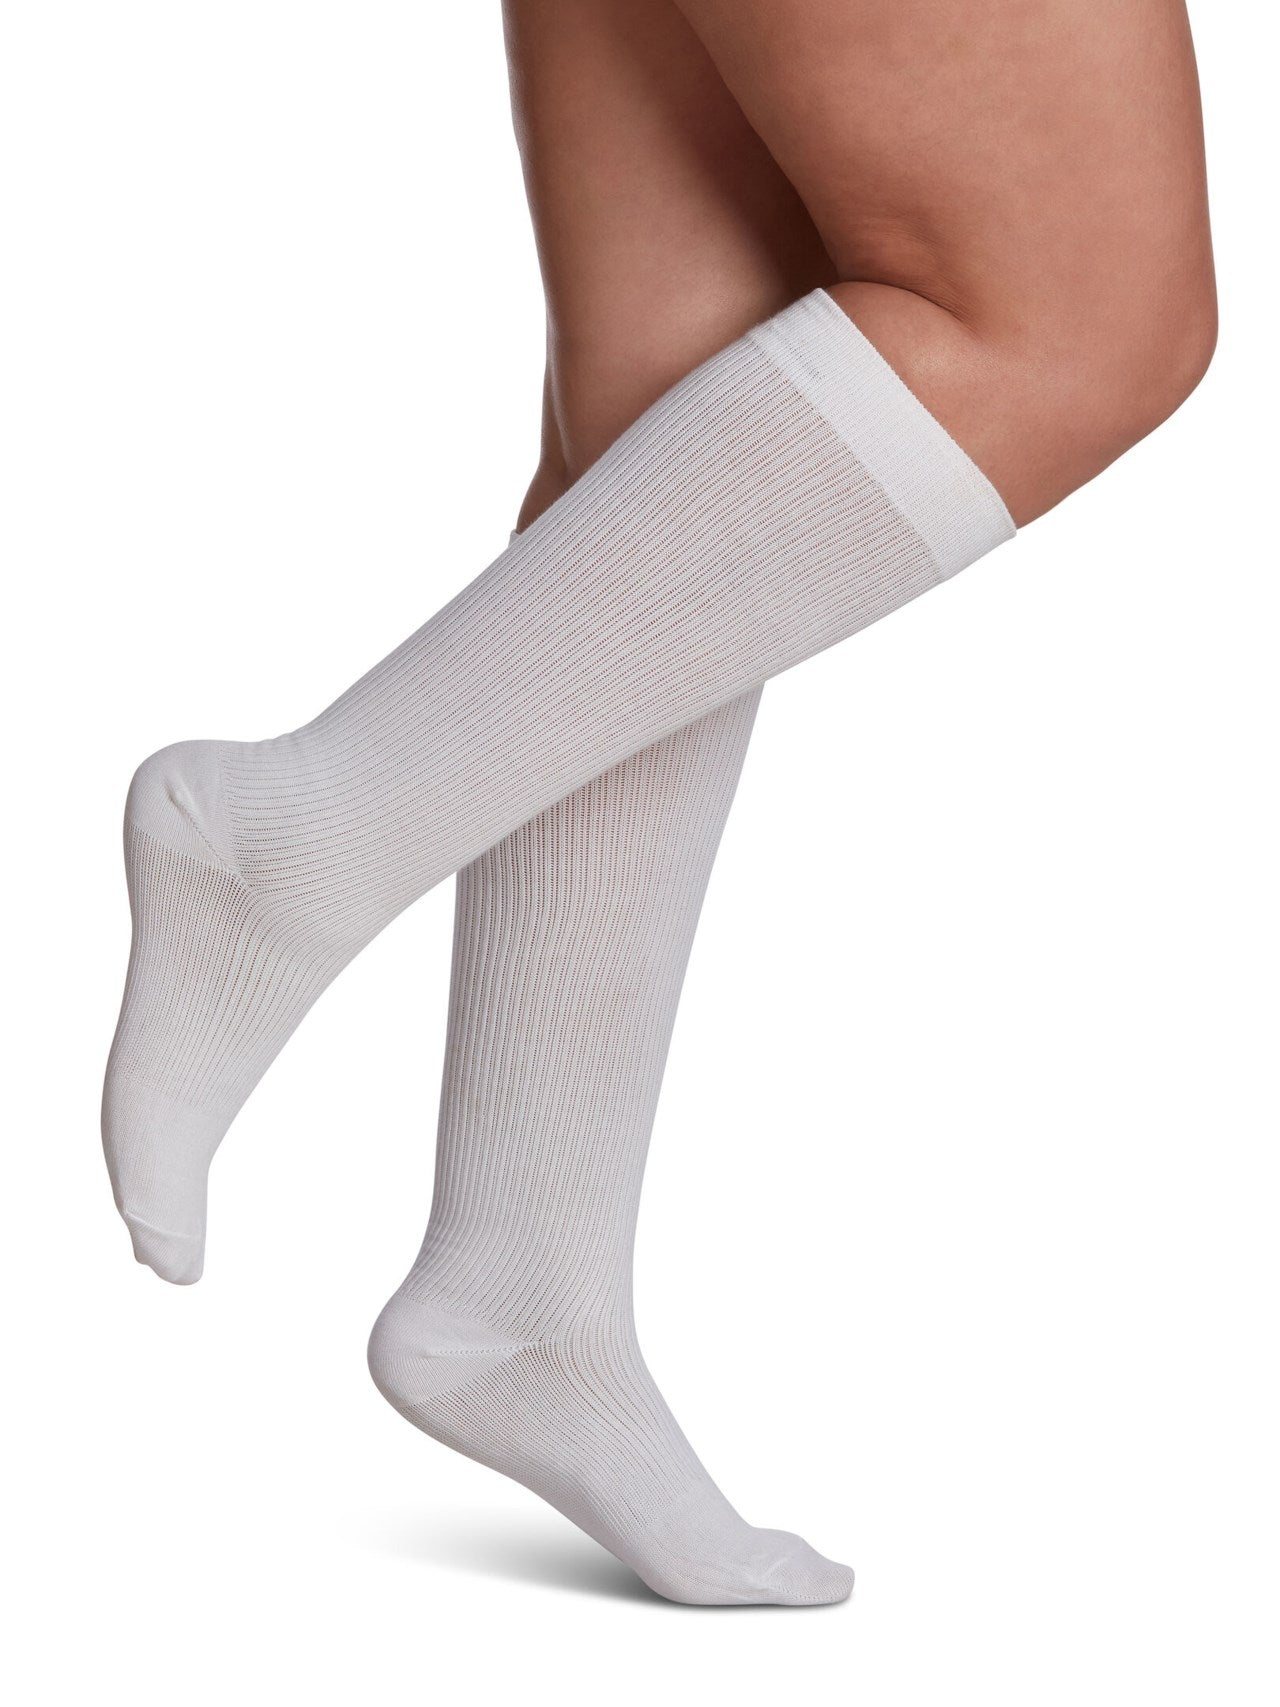 Sigvaris 140 Casual Cotton Compression Socks 15-20 mmHg Calf High For Women Closed Toe